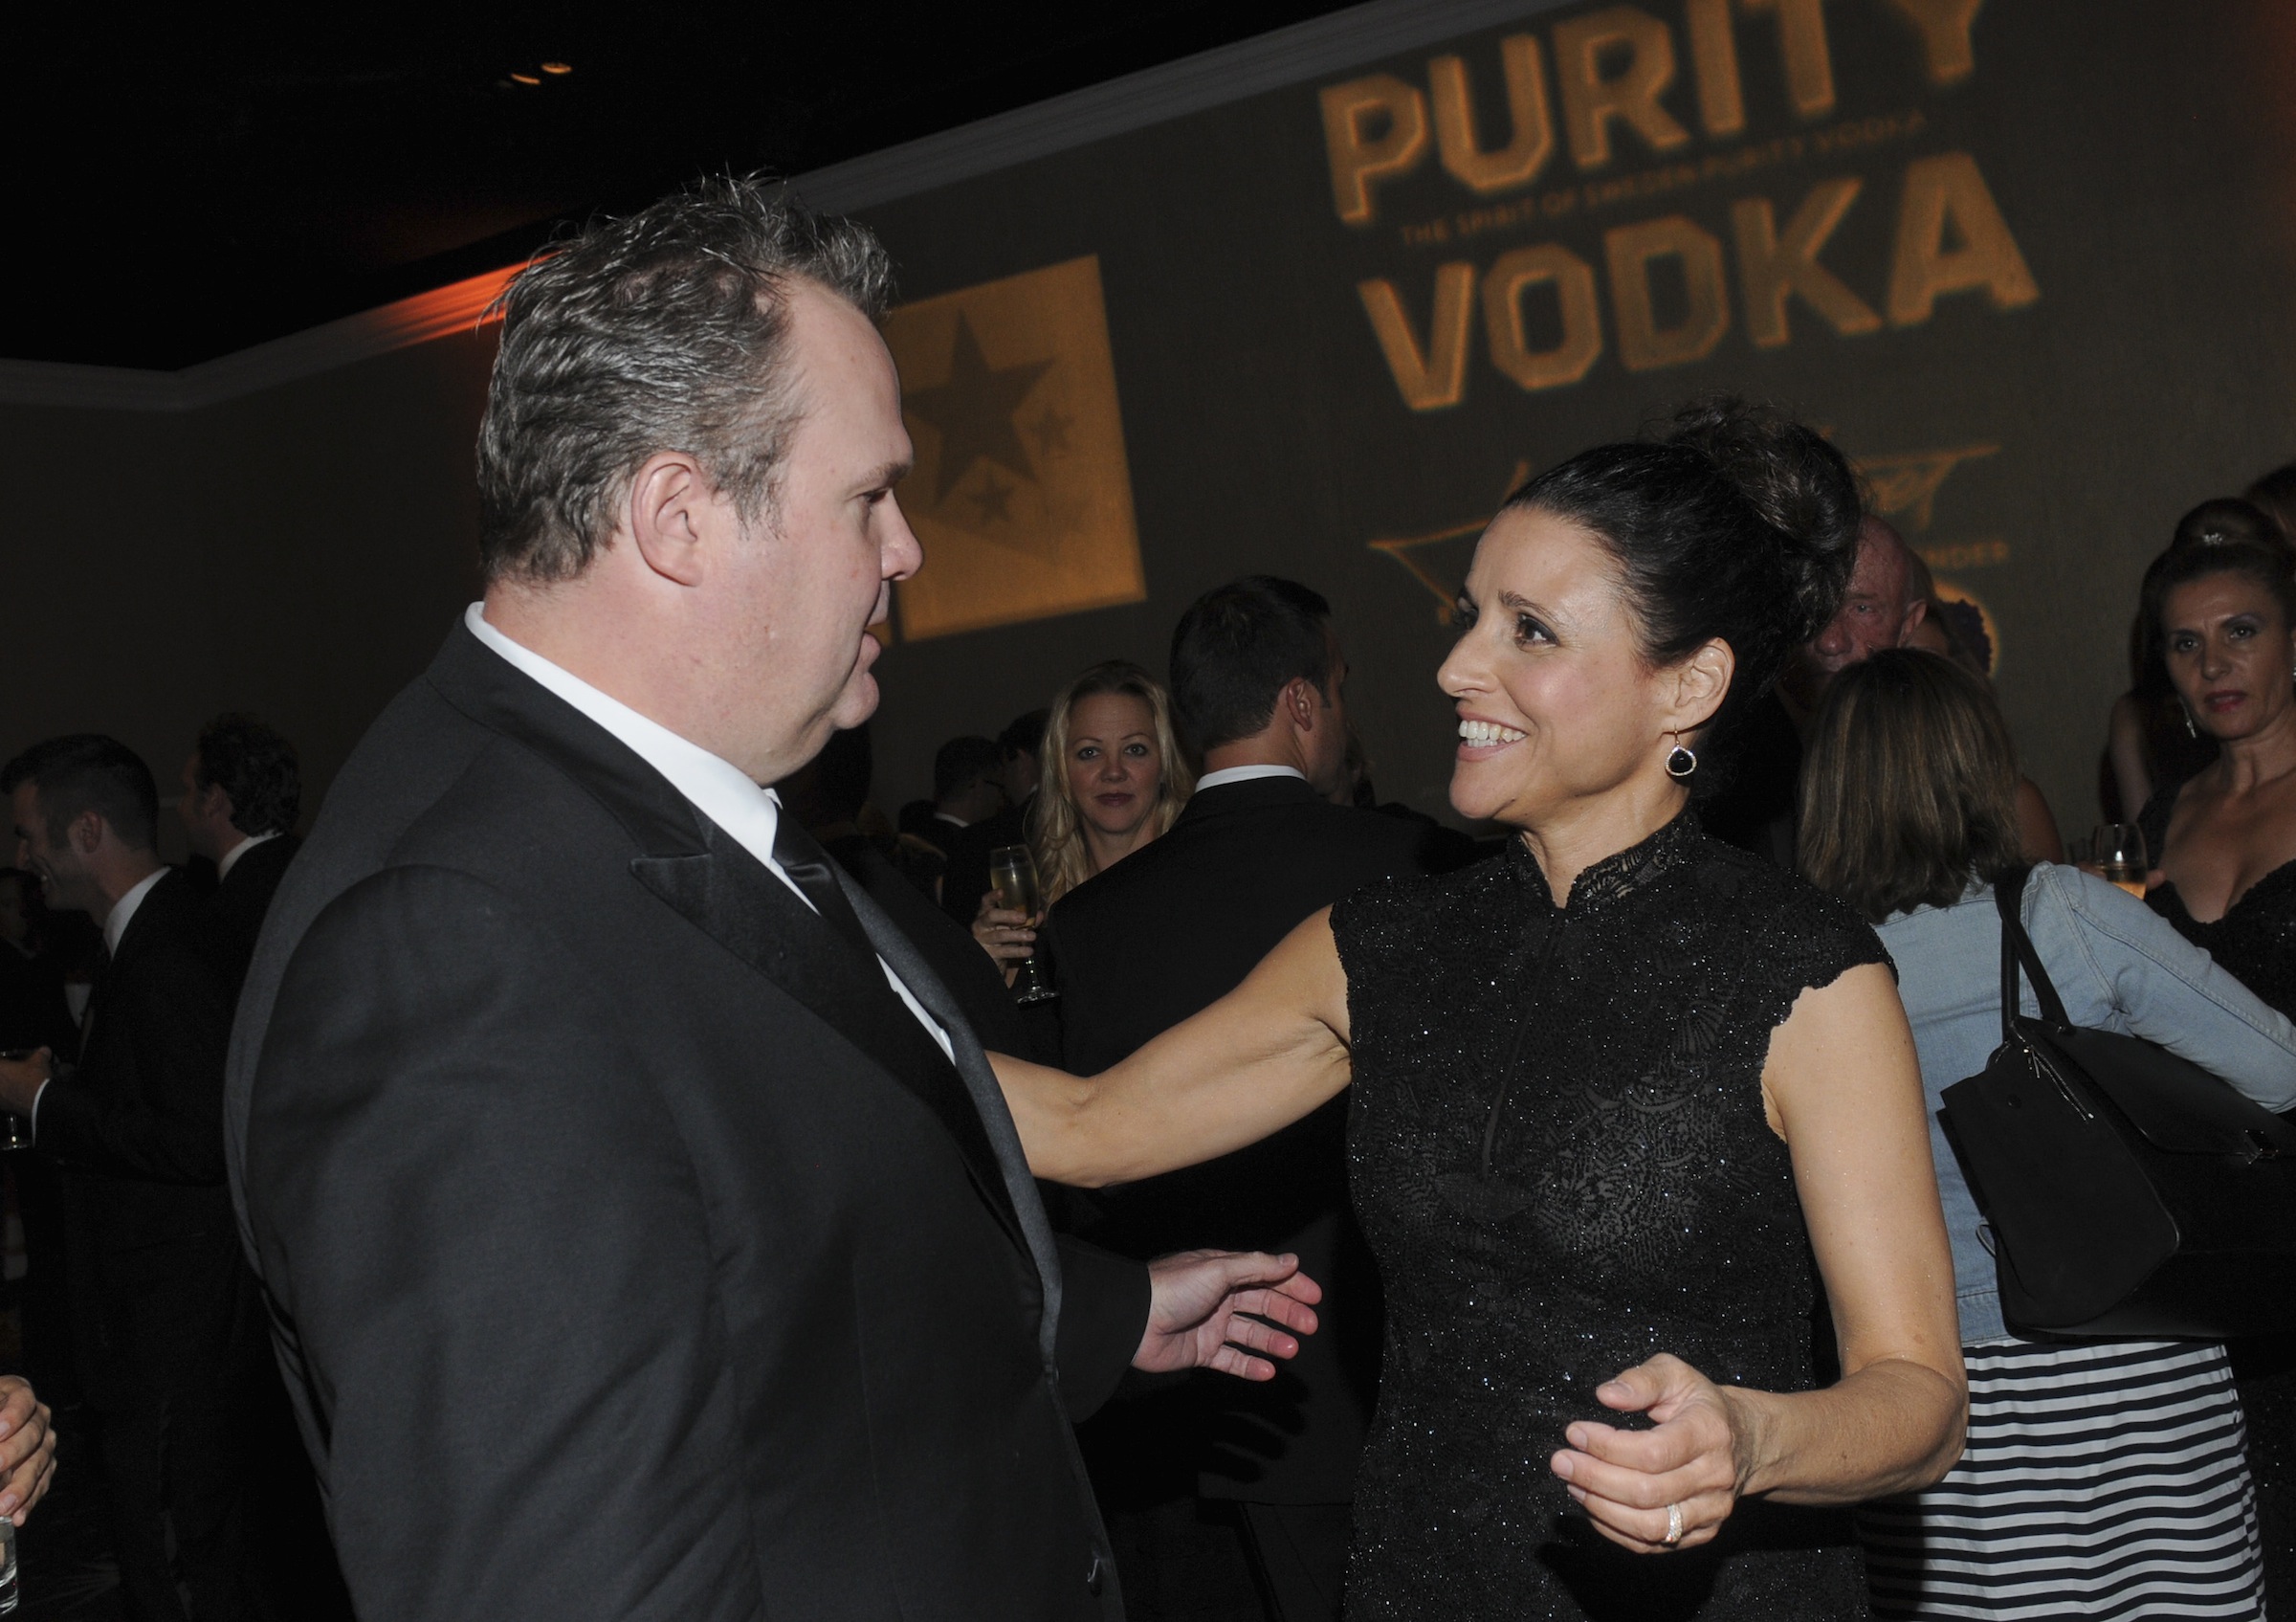 Eric Stonestreet and Julia  Louis-Dreyfus at the Critics' Choice Awards sponsored by Purity Vodka